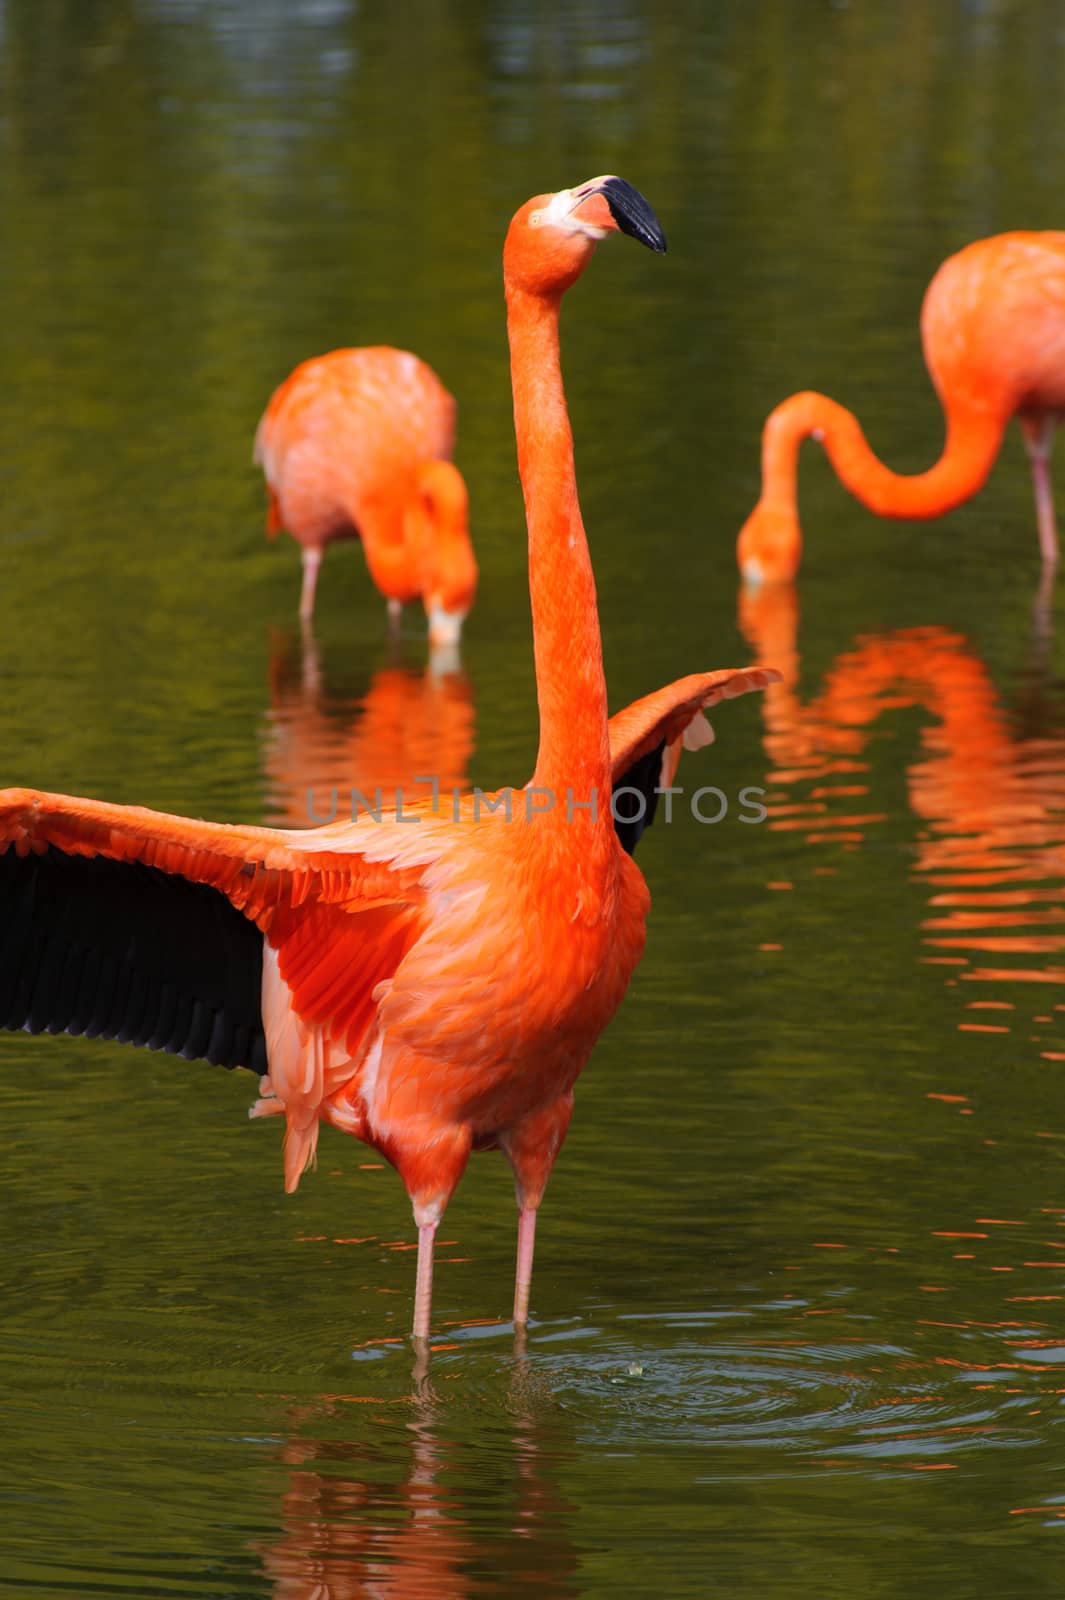 Flamingo flaps wings by kmwphotography